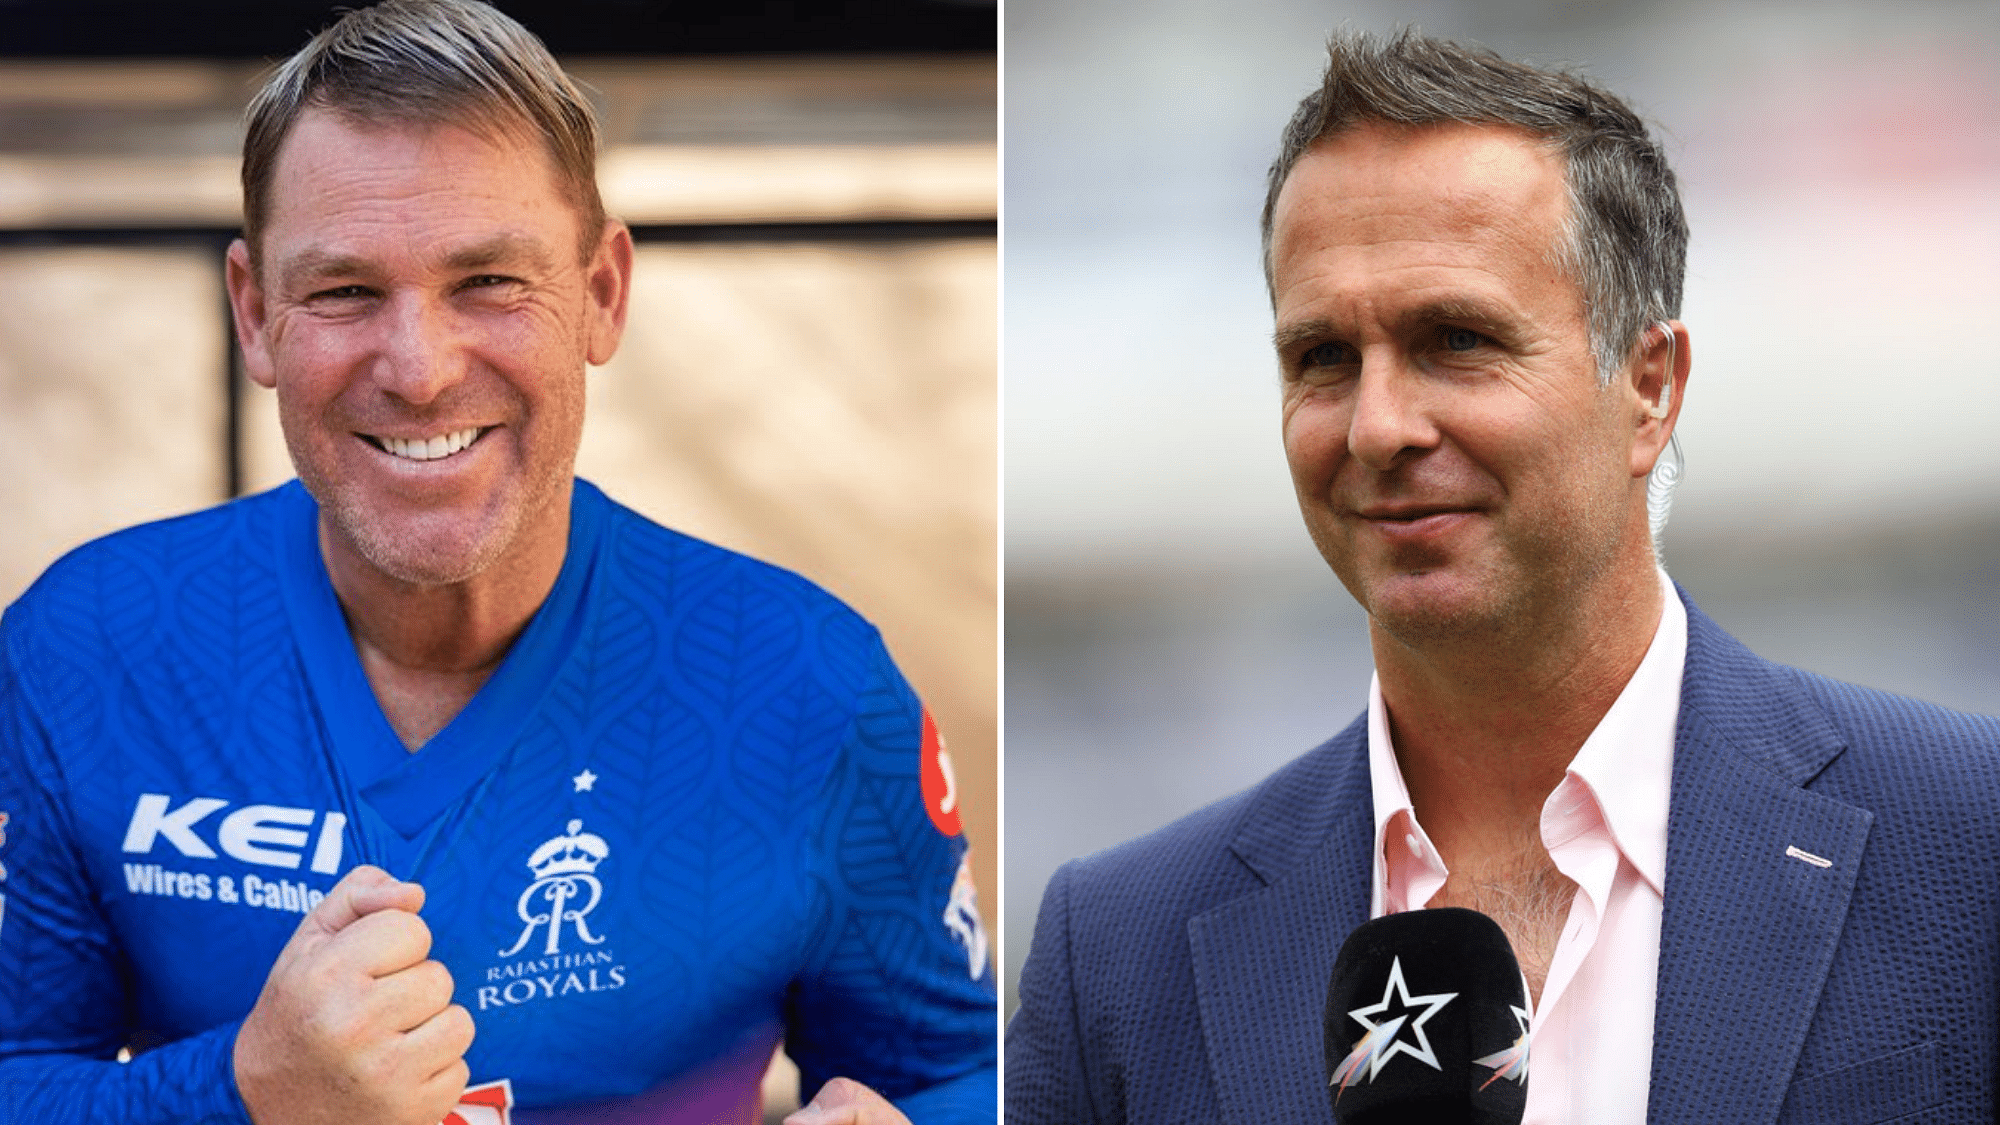 Rajasthan Royals’ mentor Shane Warne had a feeling before his side’s game against Sunrisers Hyderabad that they will win and Vaughan was proved wrong